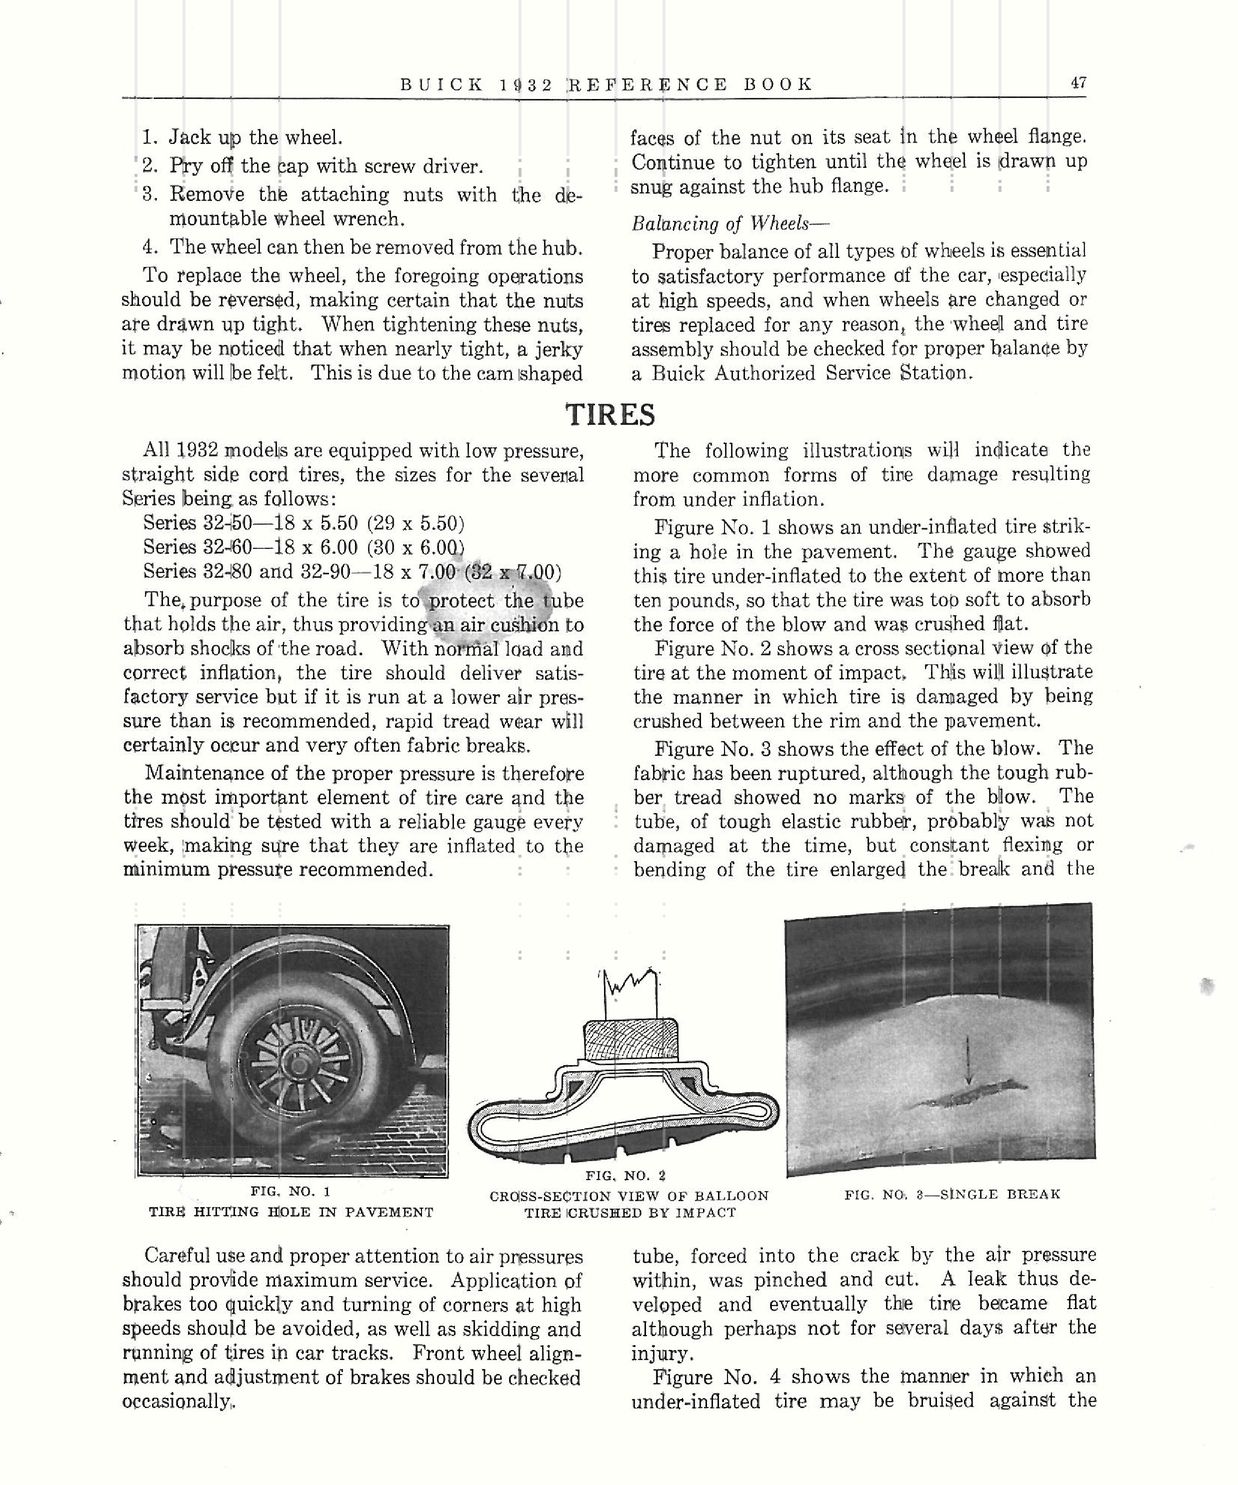 1932 Buick Reference Book-47